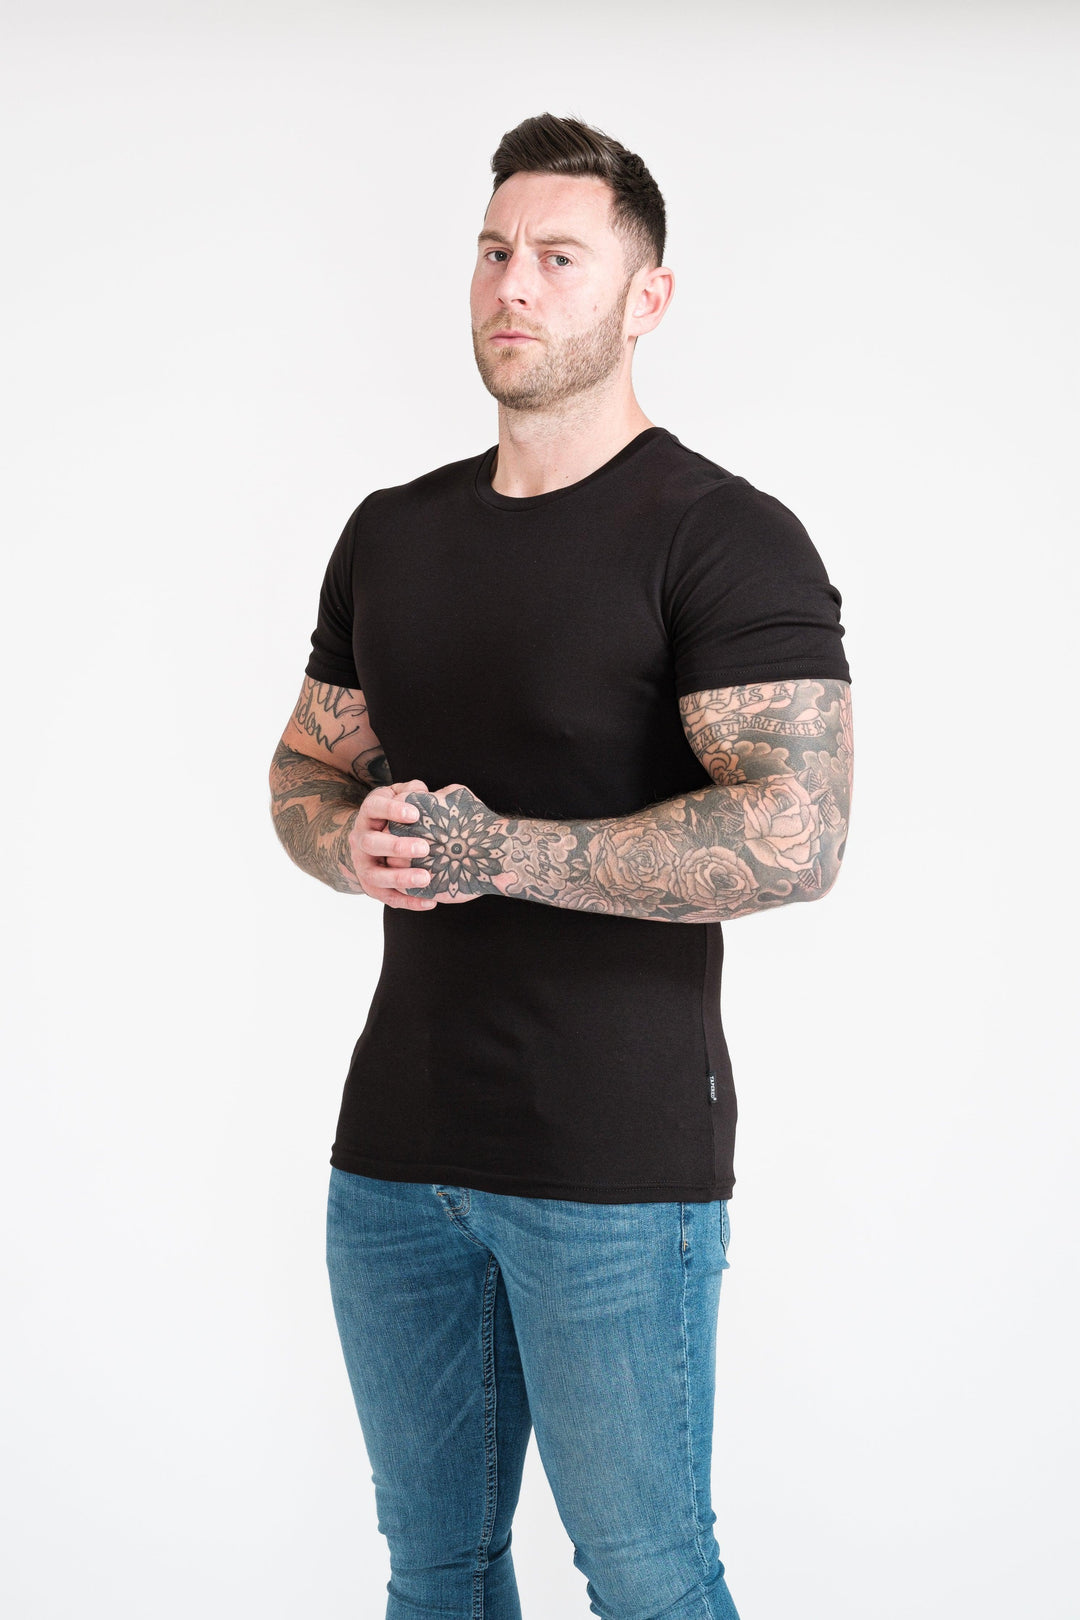 Mens Black Tapered Fit T-Shirt. A Proportionally Fitted and Muscle Fit T Shirt. The best t shirt for muscular guys.